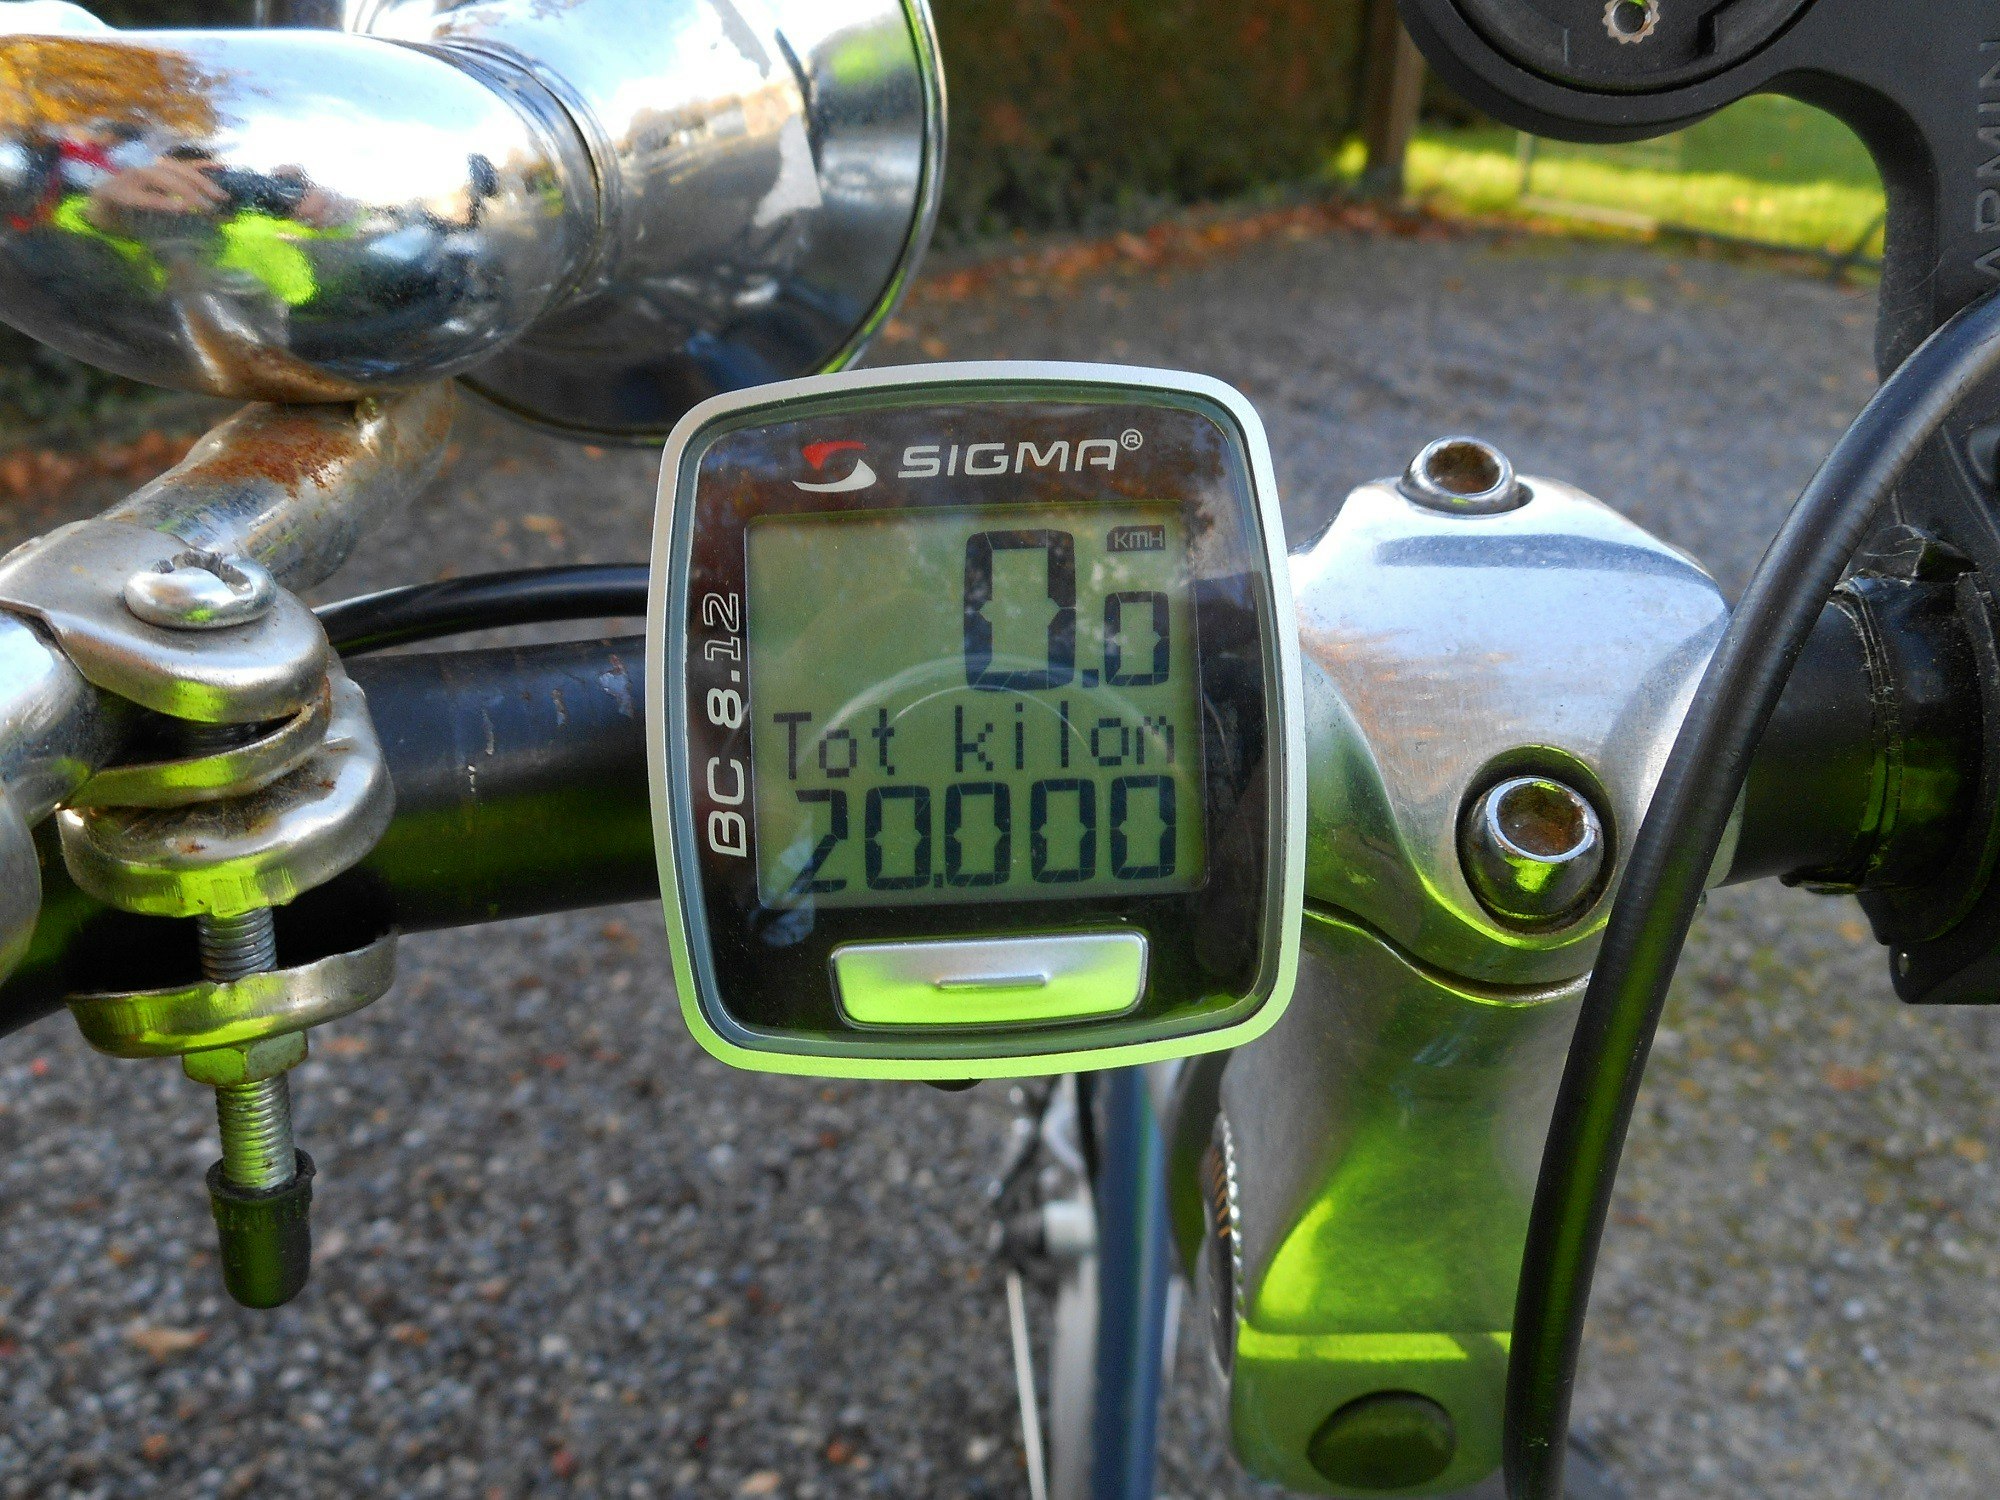 Odometer 20000 km on the Easy Rider tricycle